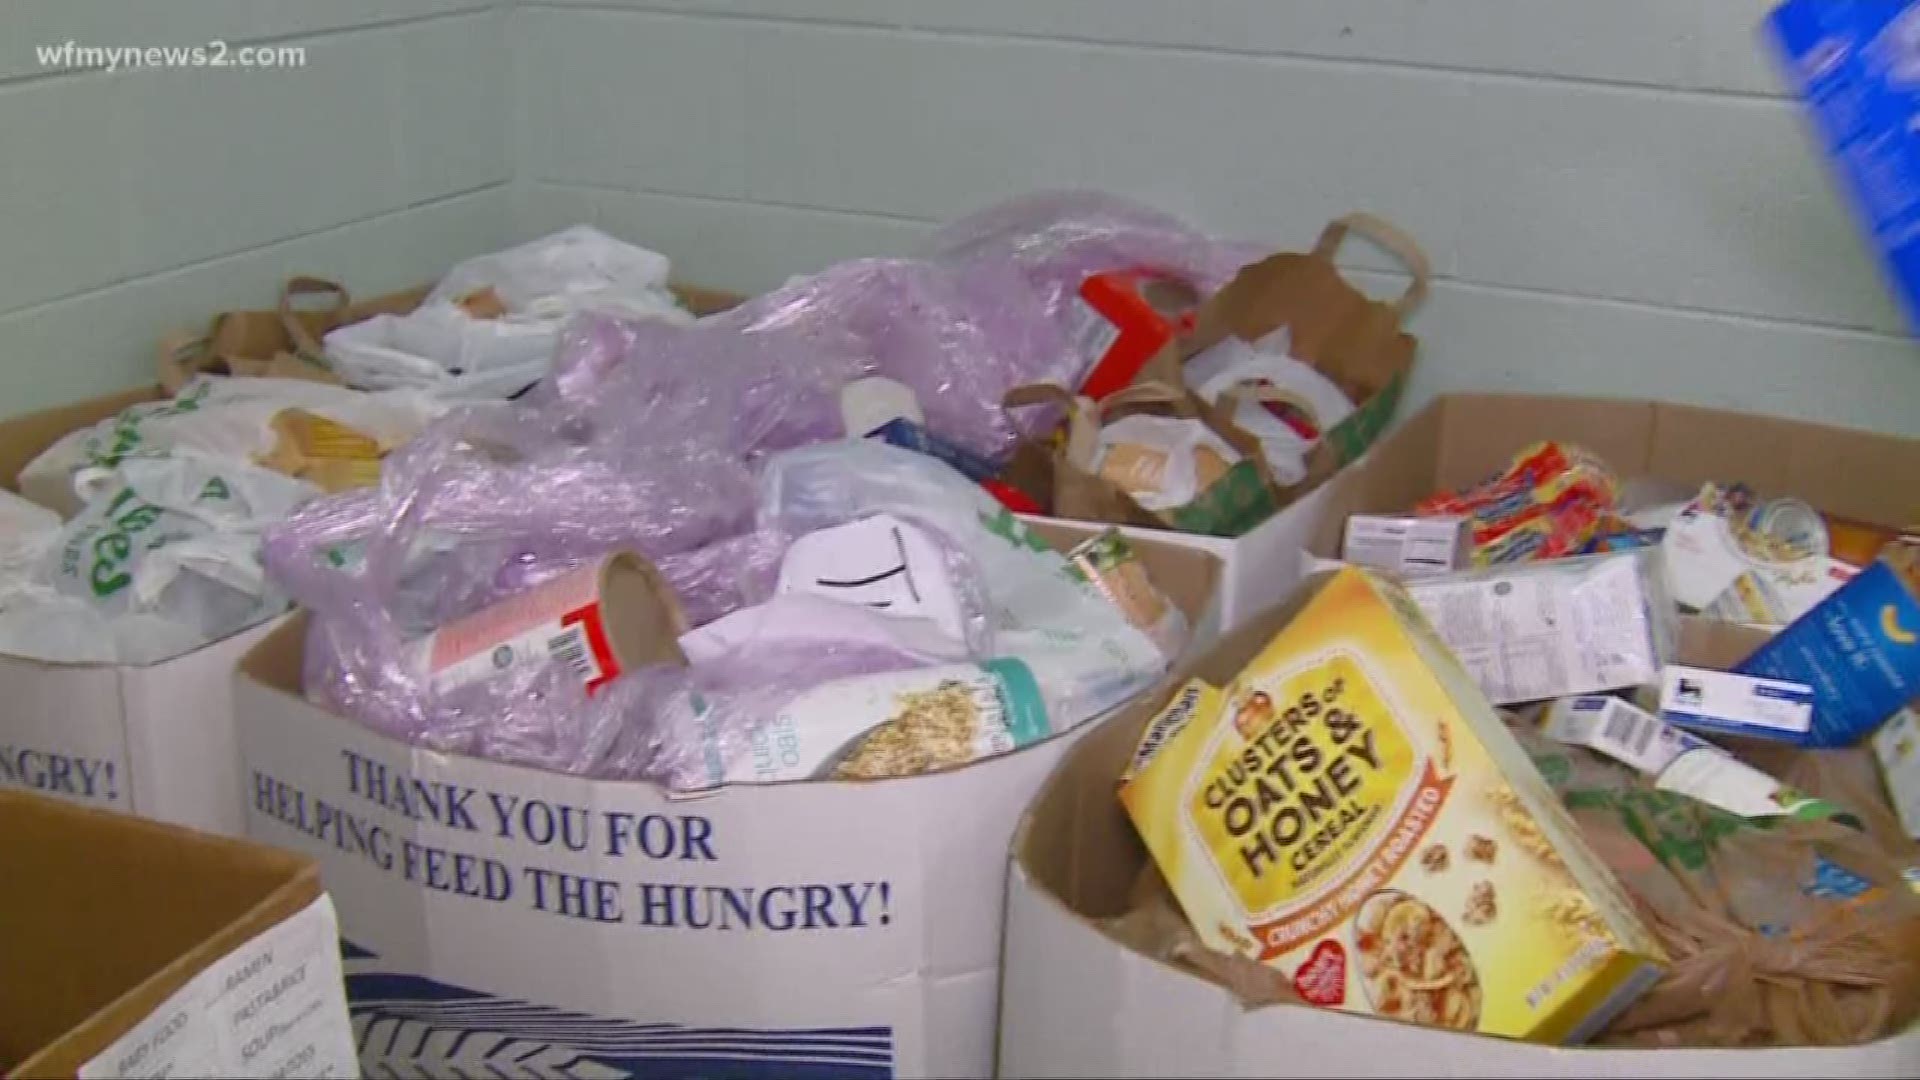 Greensboro Urban Ministry is collecting donations for people suffering from hunger and homelessness.